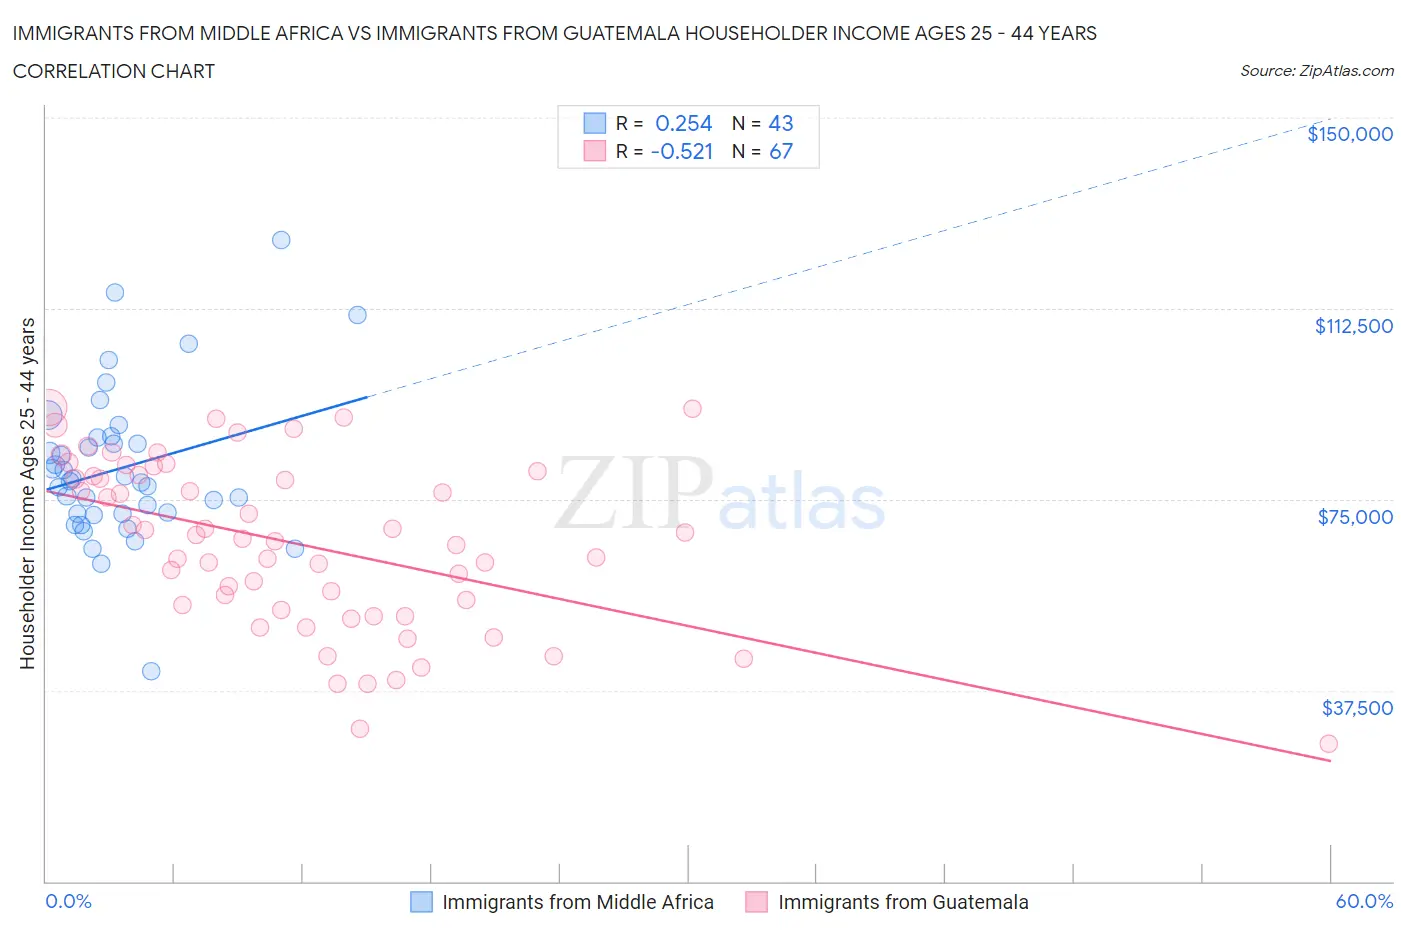 Immigrants from Middle Africa vs Immigrants from Guatemala Householder Income Ages 25 - 44 years